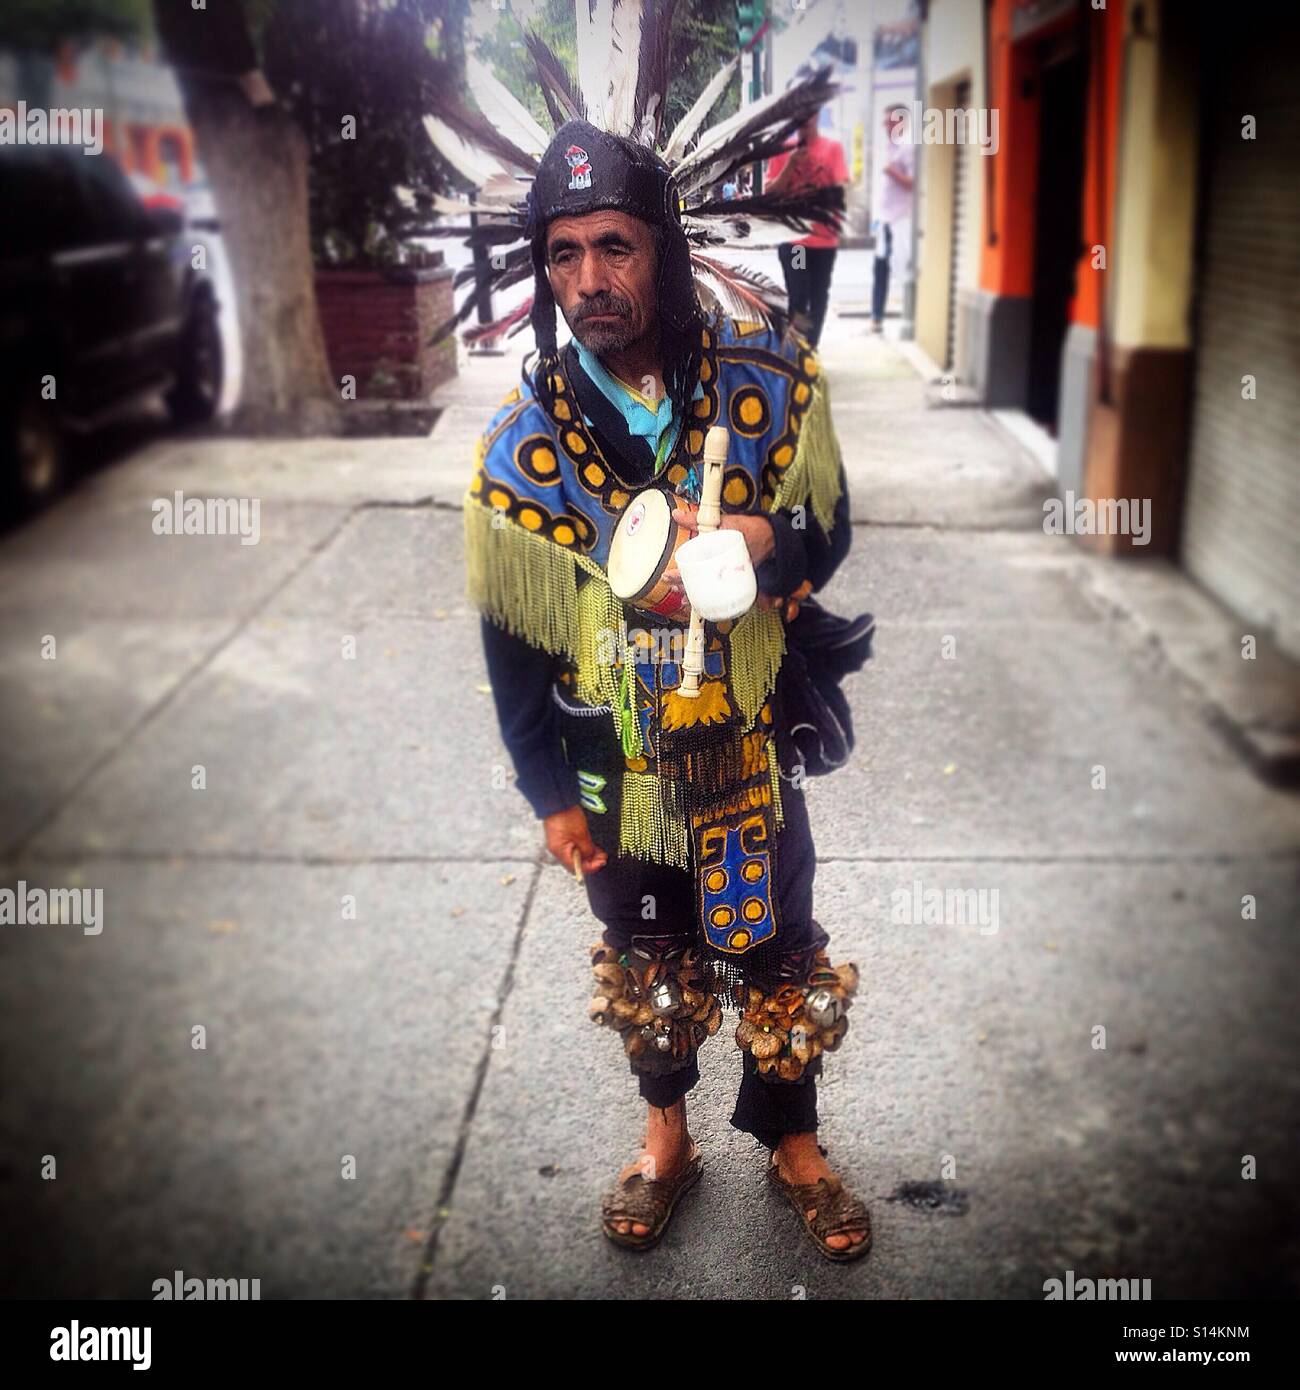 A Mexican dressed as an Aztec dancer plays music in the street in Colonia Roma, Mexico City, Mexico Stock Photo